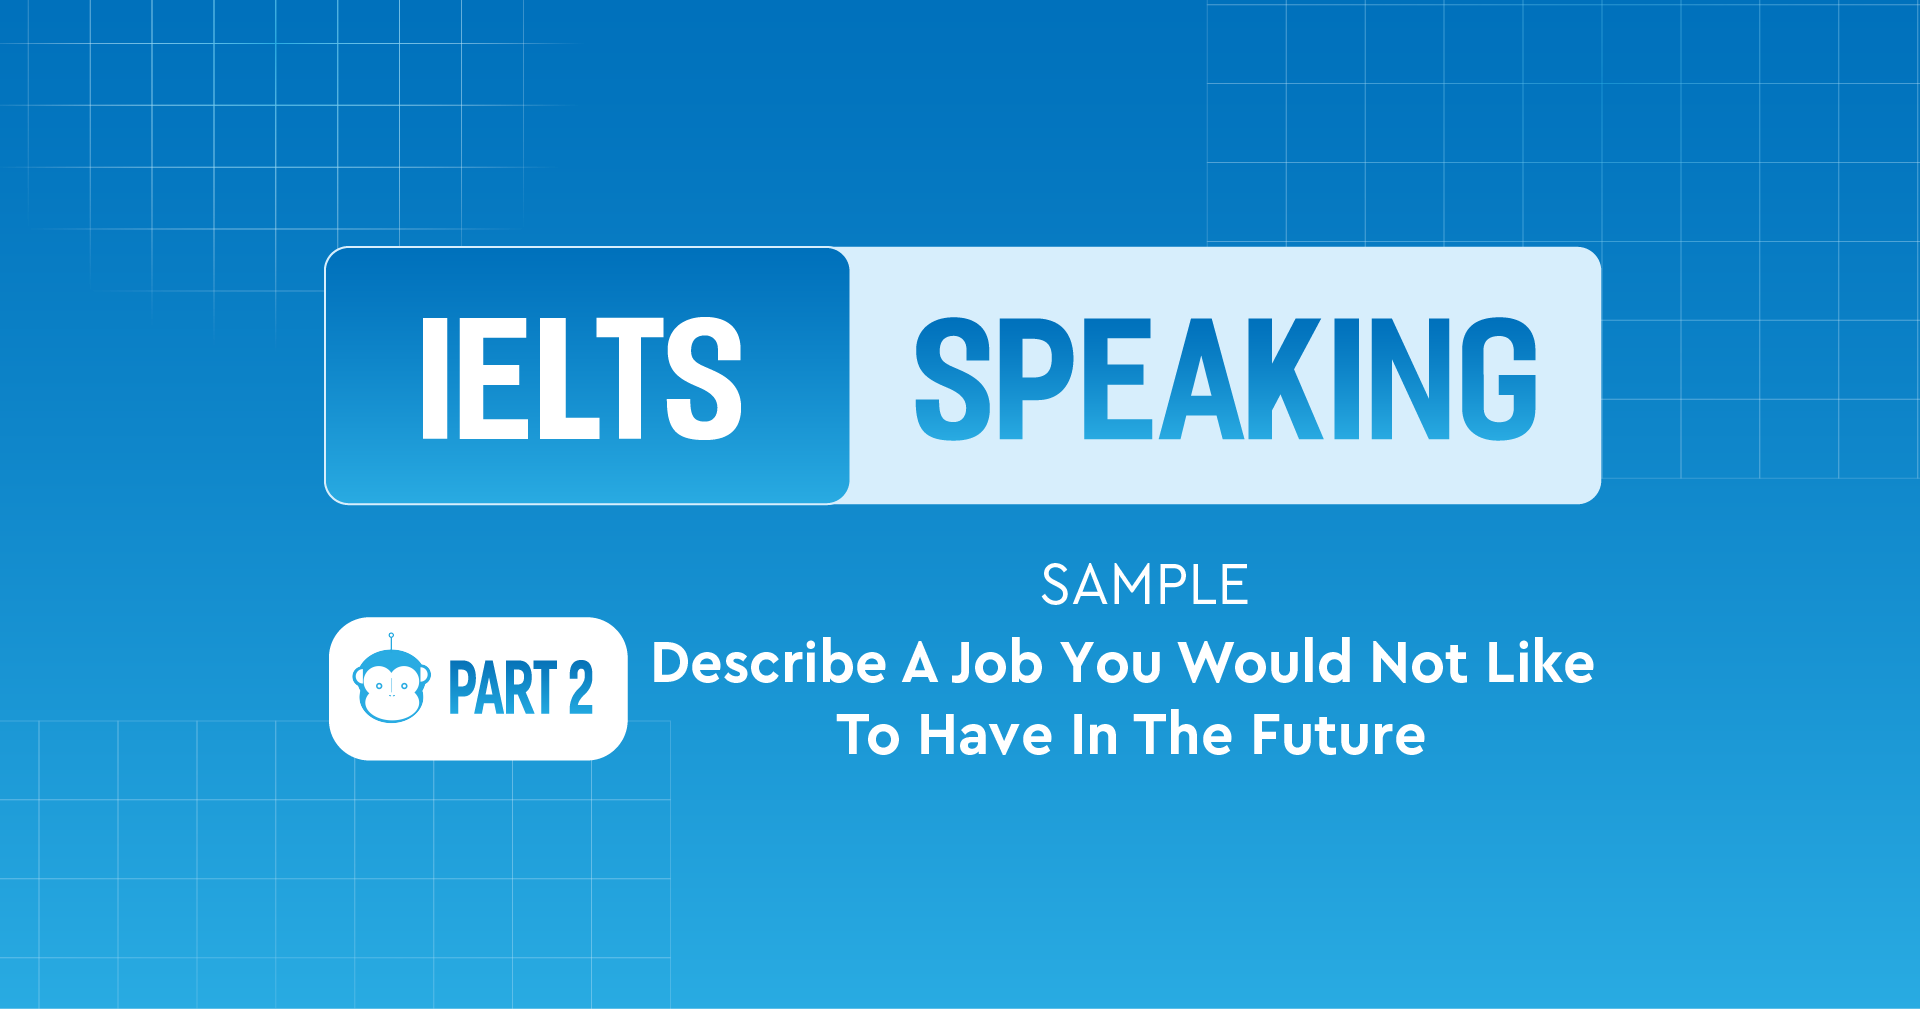 Describe A Job You Would Not Like To Have In The Future - Sample IELTS Speaking Part 2